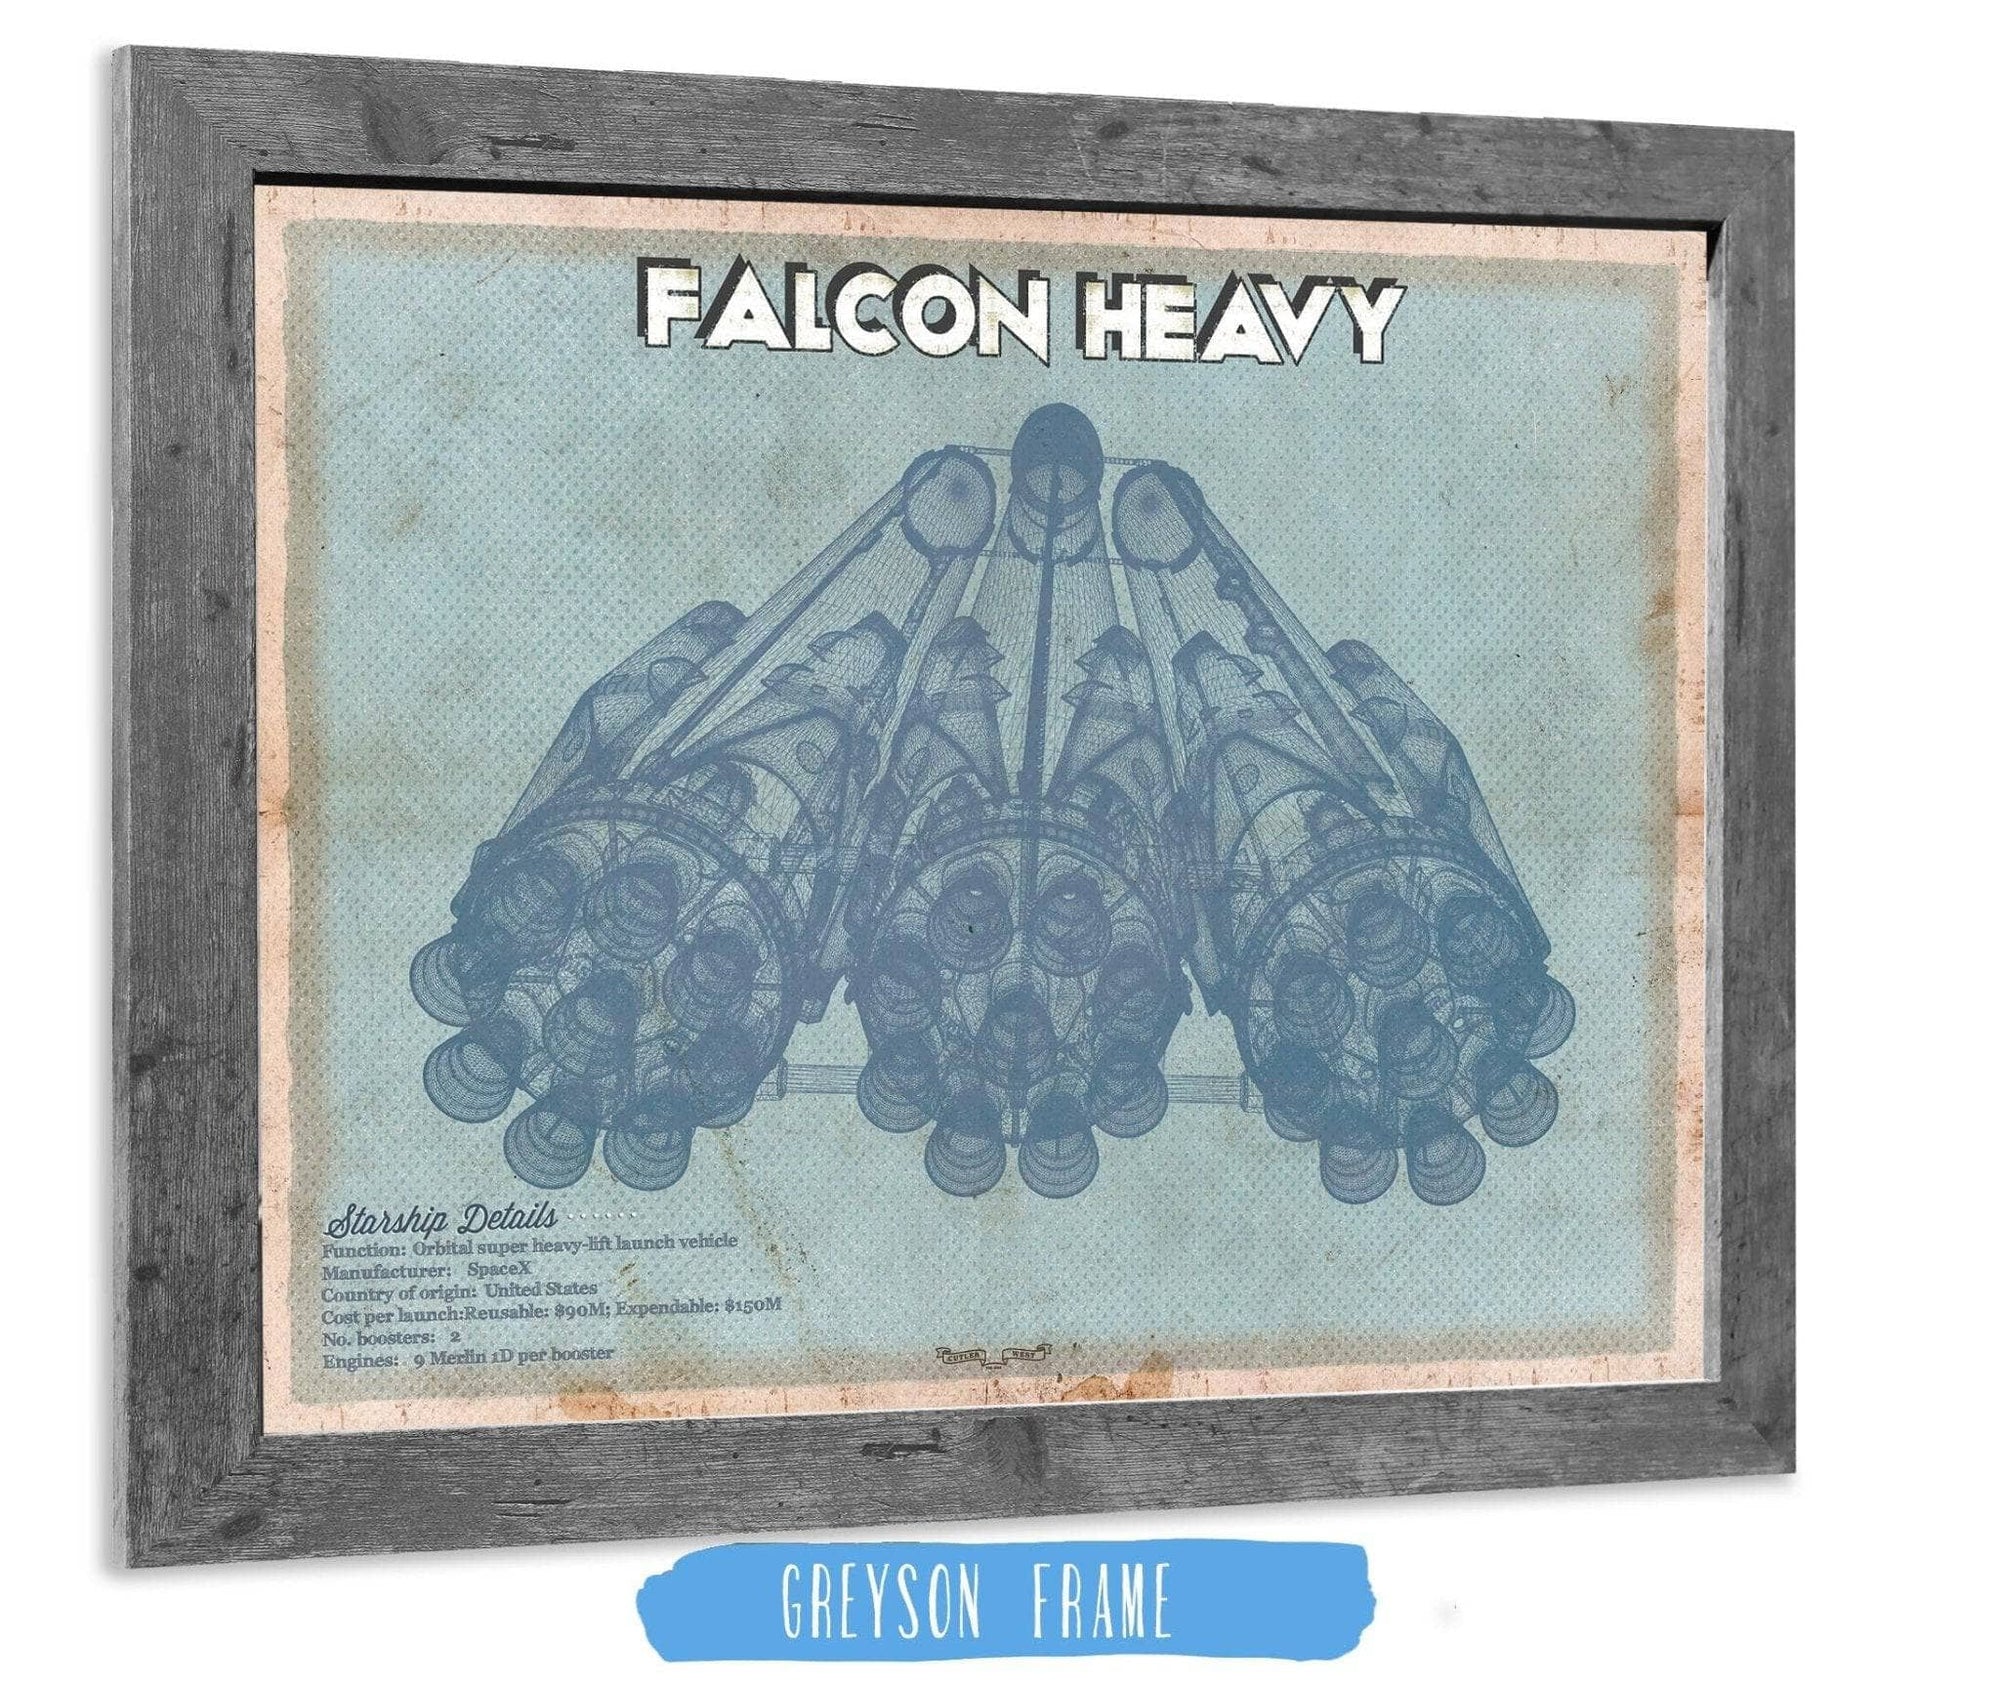 Cutler West SciFi, Fantasy, and Space Falcon Heavy Vintage Space Exploration Print